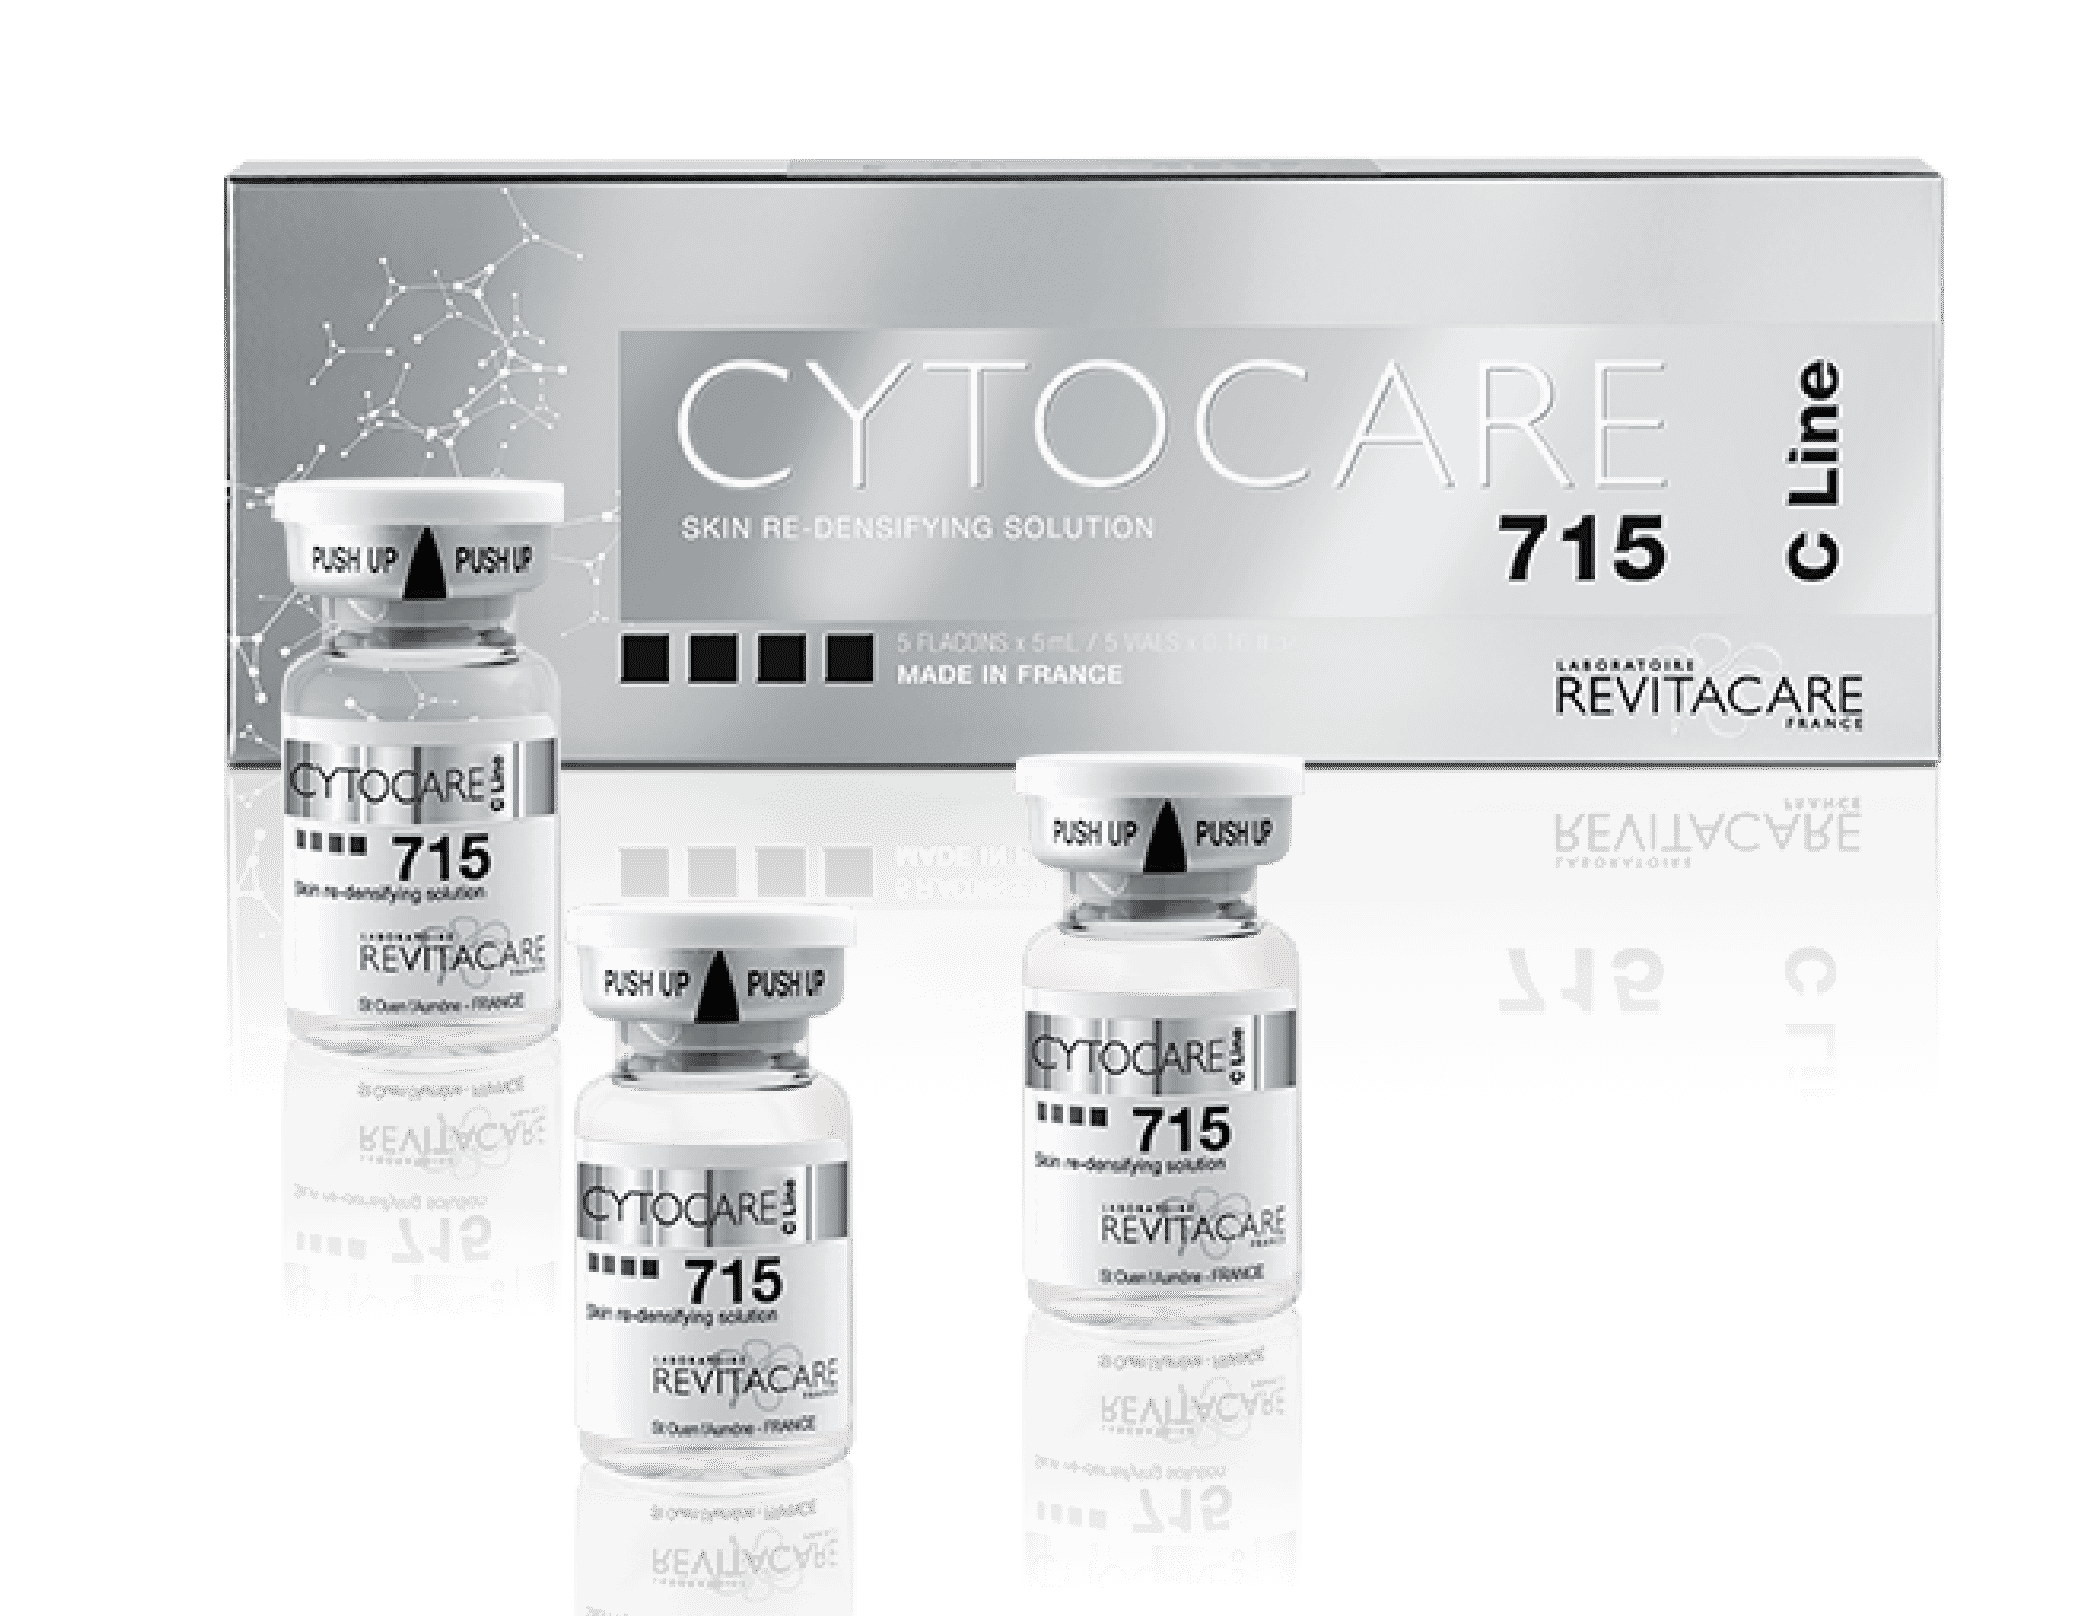 CyTocare 715Cline skin re-densifying solution